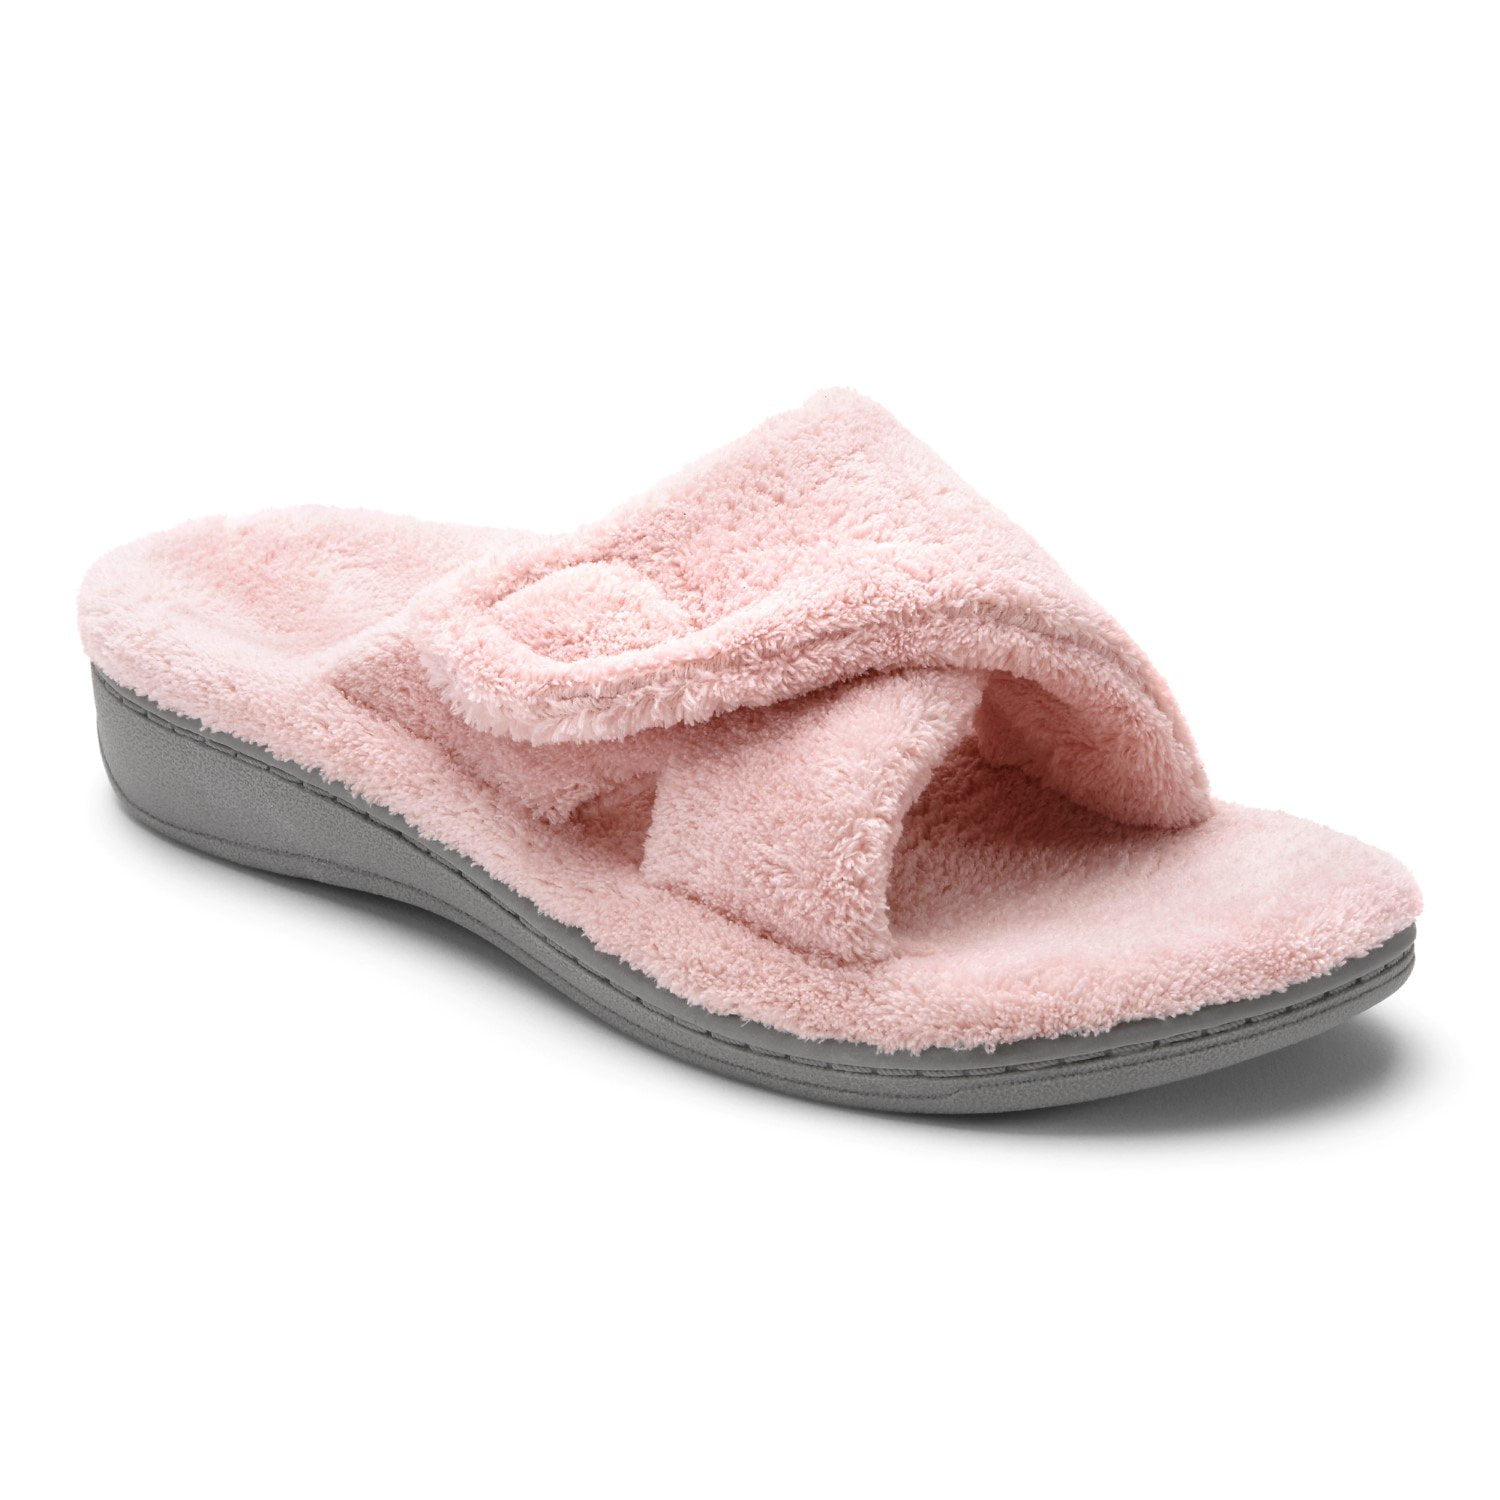 ortho slippers for ladies